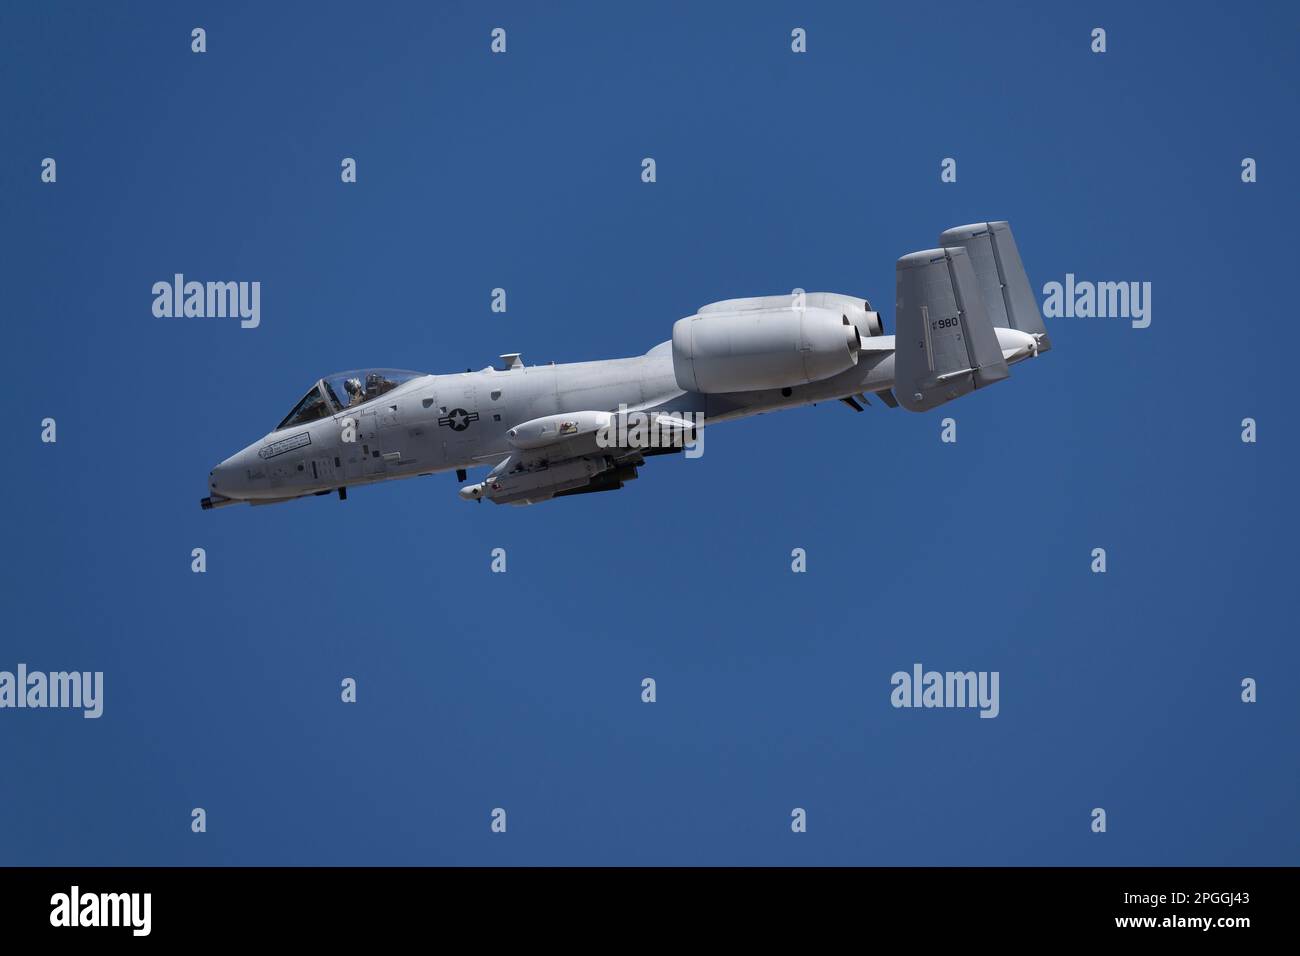 Las Vegas, NV - January 23, 2022: A-10 Warthog Attack Jet After Take-Off During the Red Flag 23-1 Exercise at Nellis AFB. Stock Photo